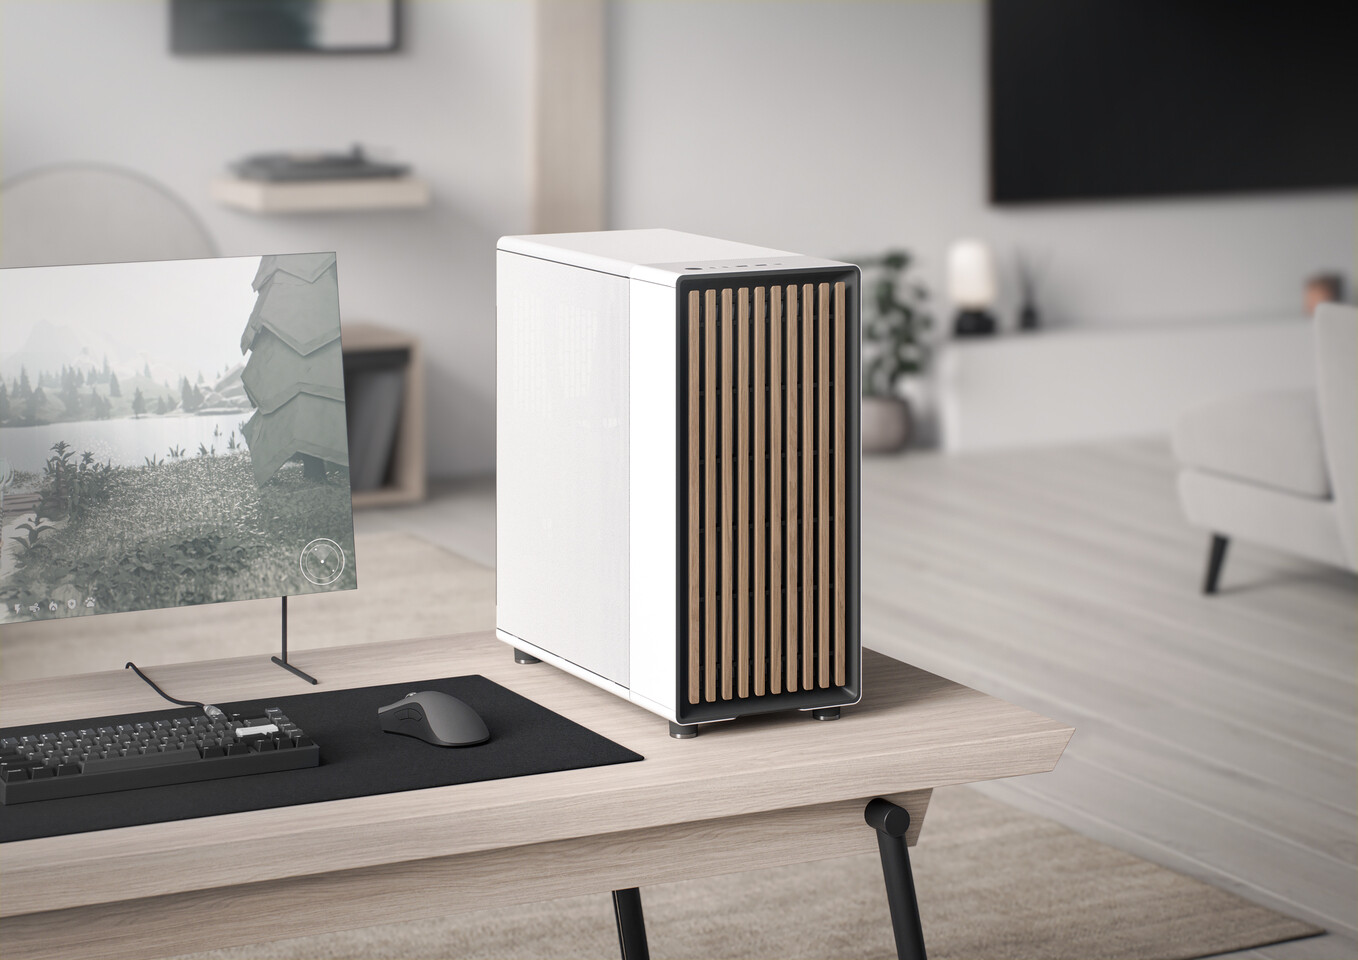 Fractal Design Introduces the North Mid-tower Case with Wooden Elements